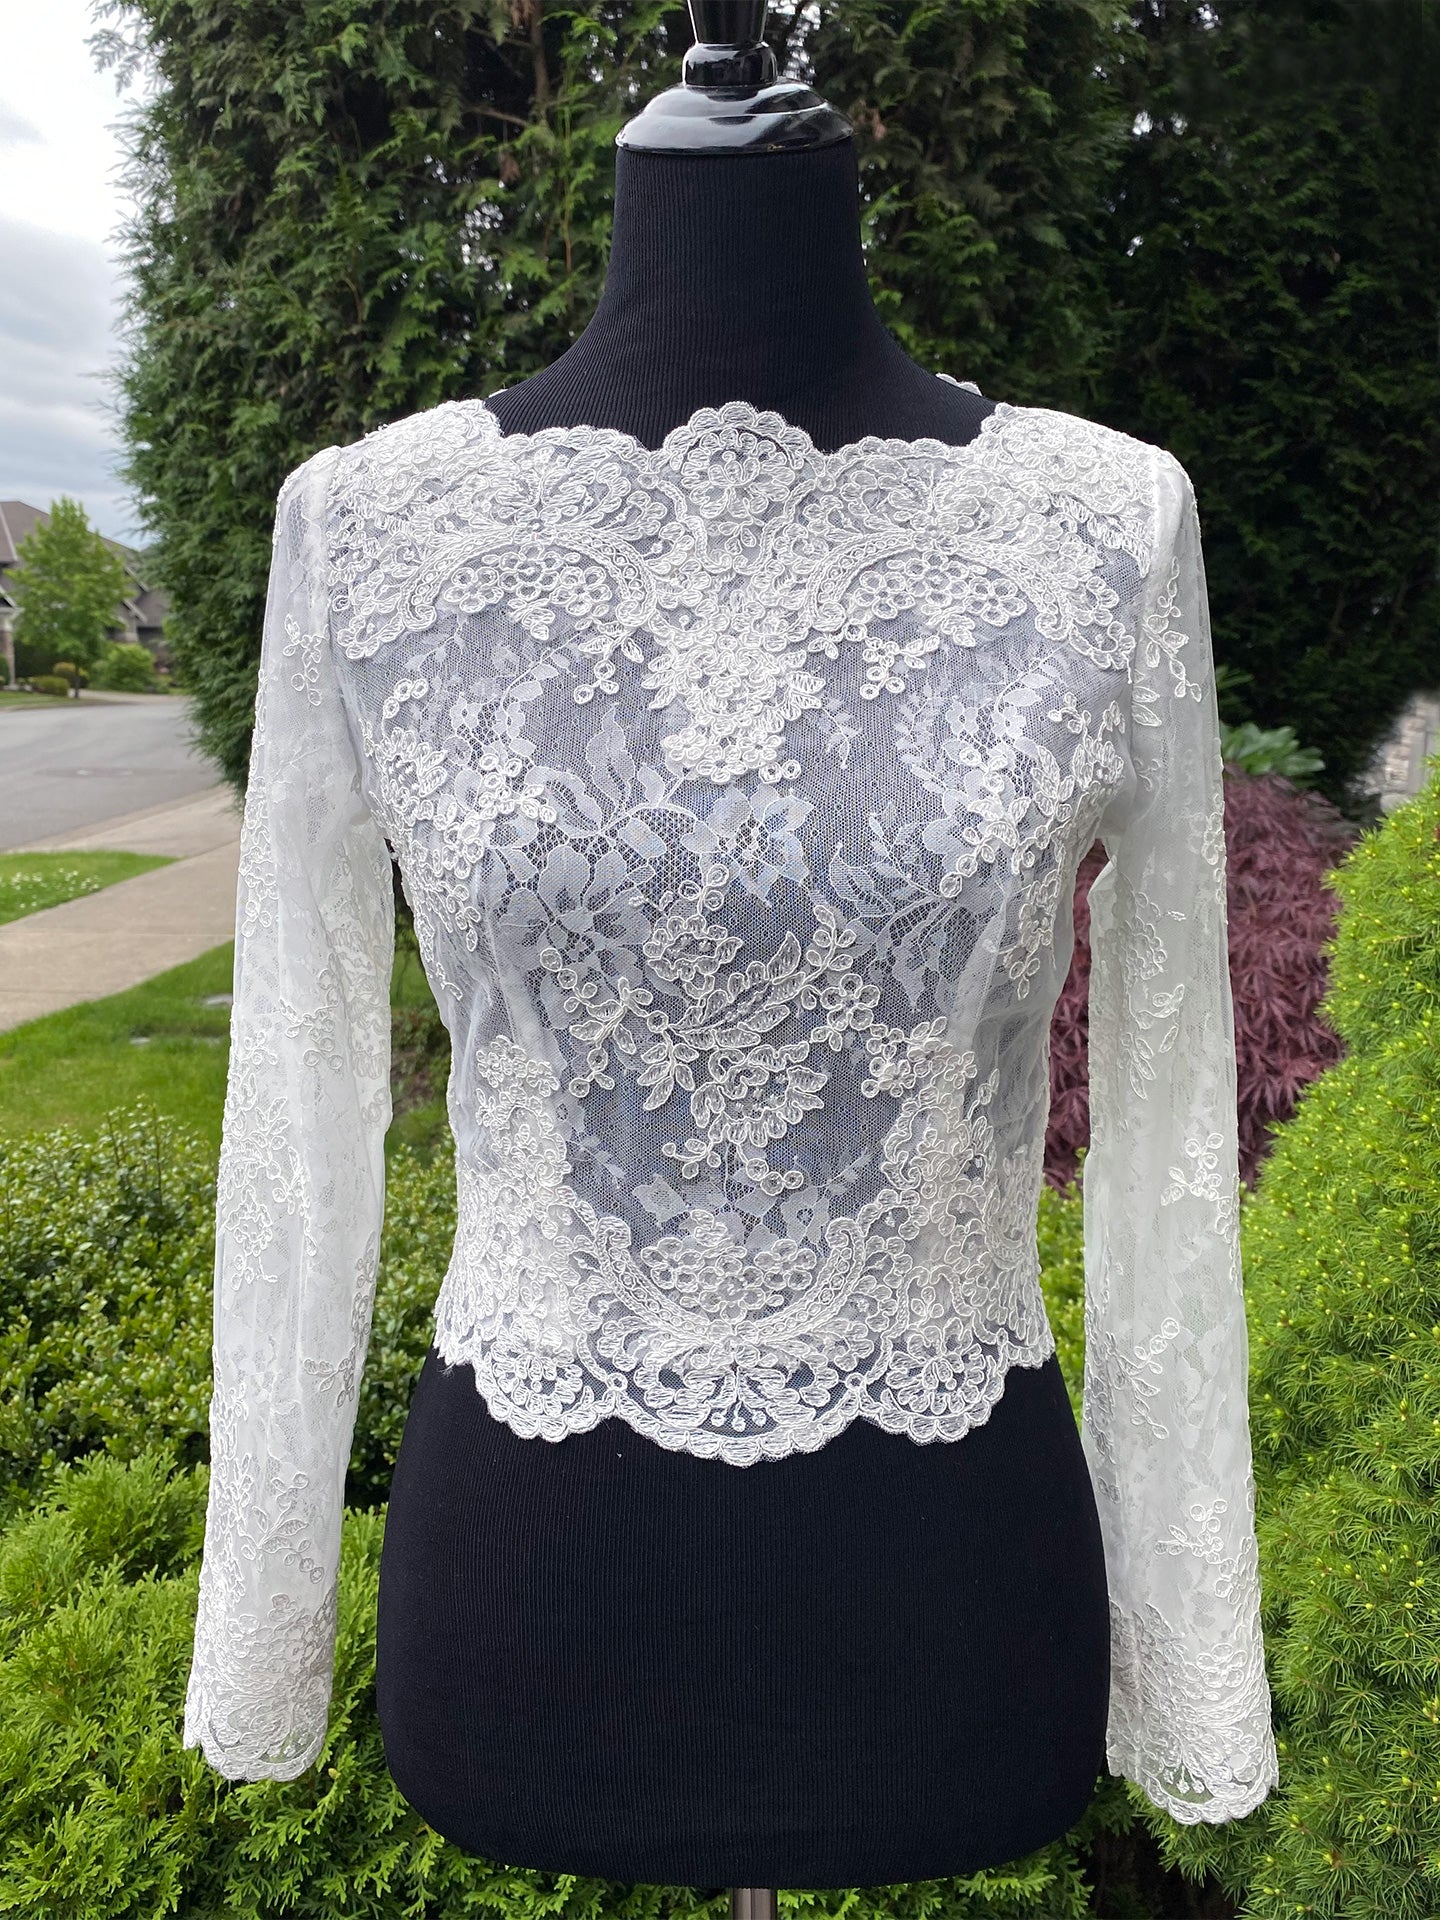 Double layer long sleeve wedding dress topper